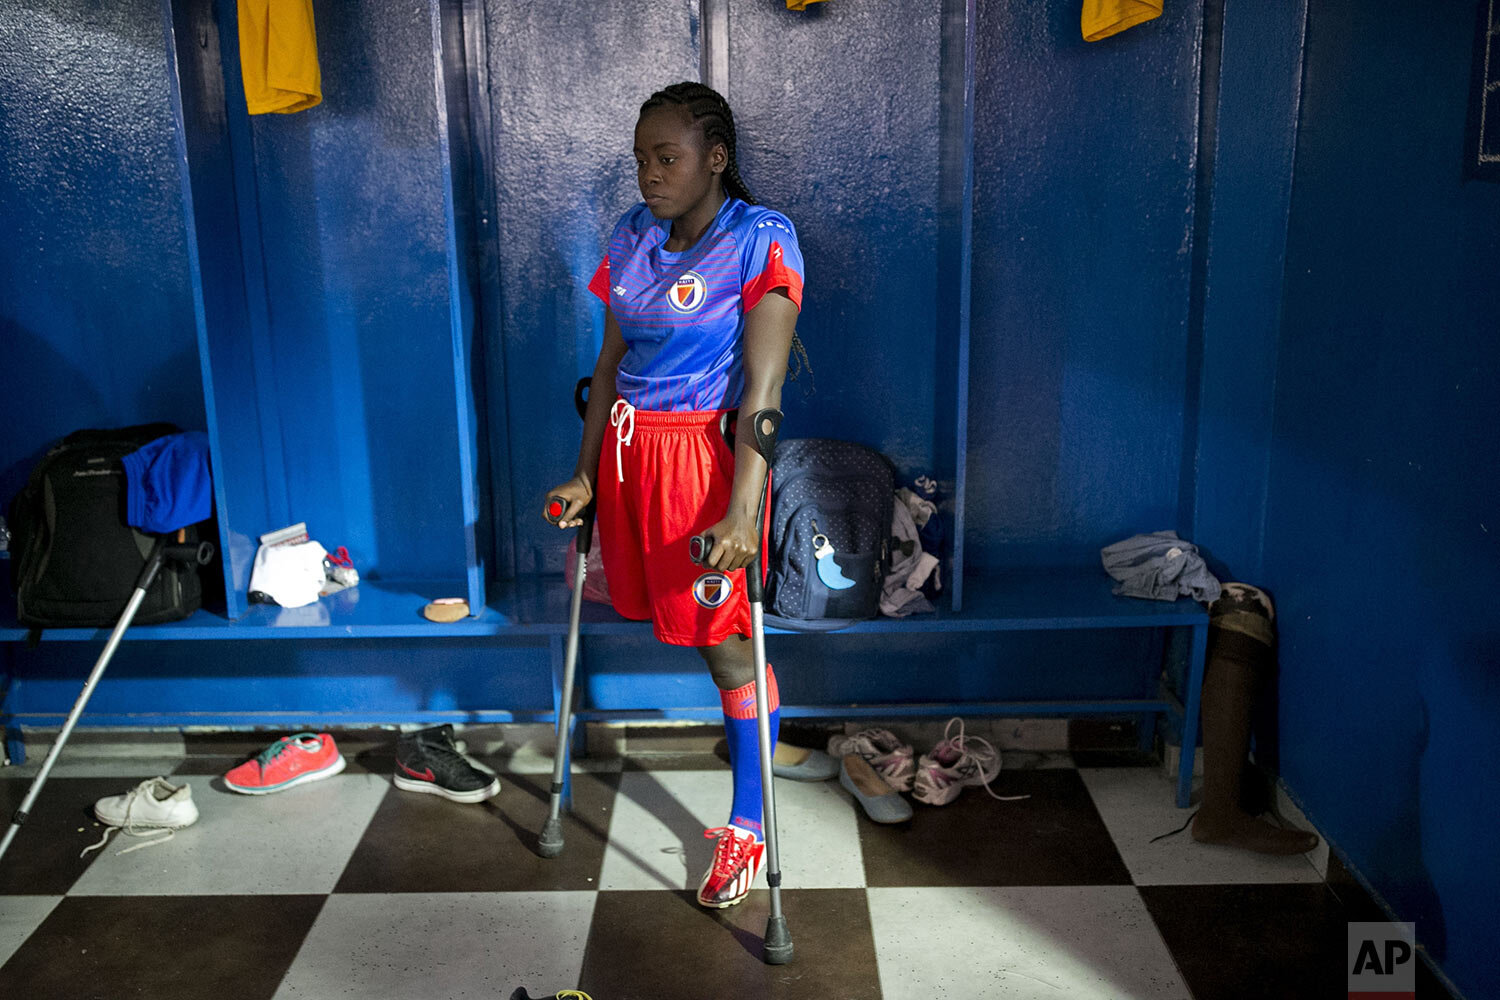  A player on Haiti's amputee women's soccer team gets lost in thought before the start of a match with the Dominican Republic, to mark International Women's Day, in the Petion-Ville suburb of Port-au-Prince, Haiti, March 8, 2020. Haiti won 2-0. (AP P